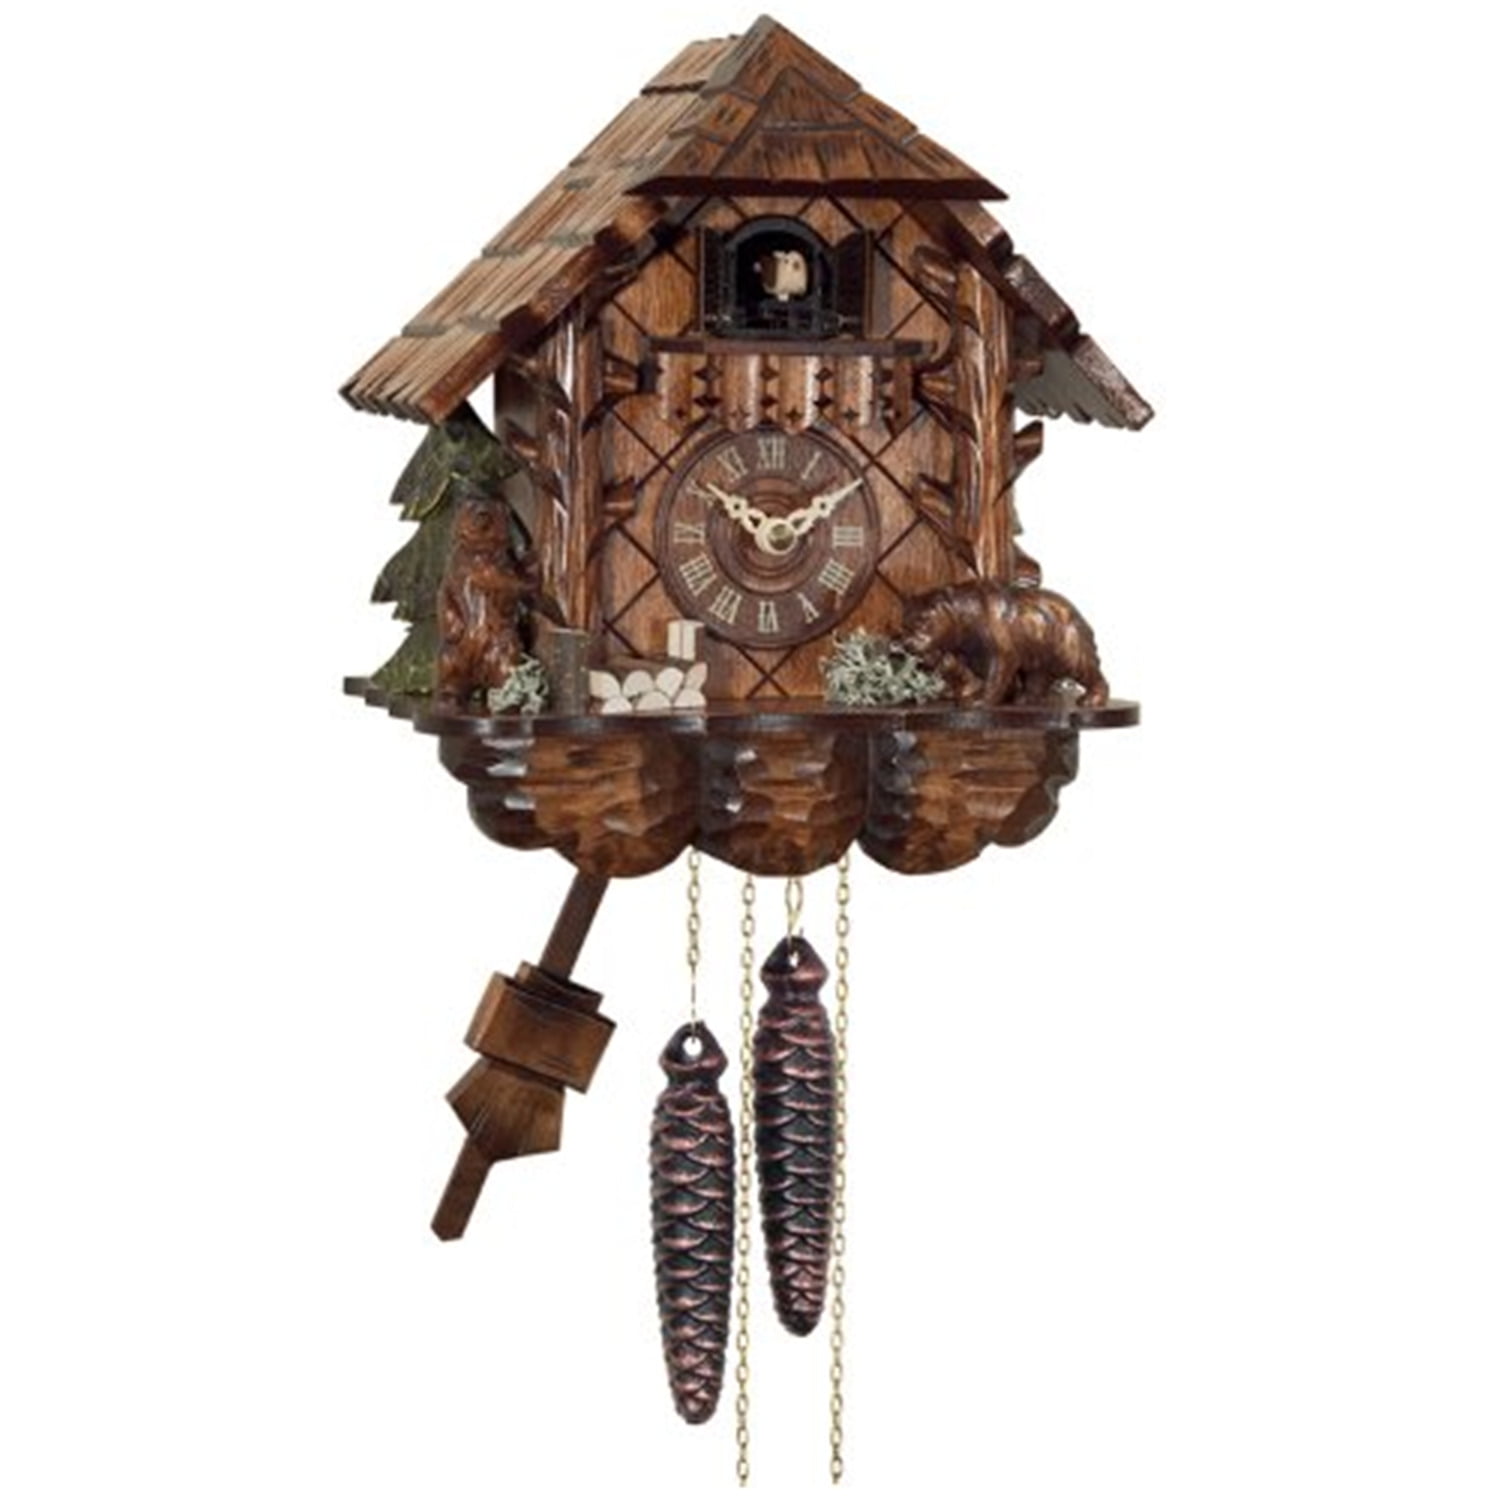 River City Clocks One Day Cuckoo Clock Cottage with Hand-carved Bears